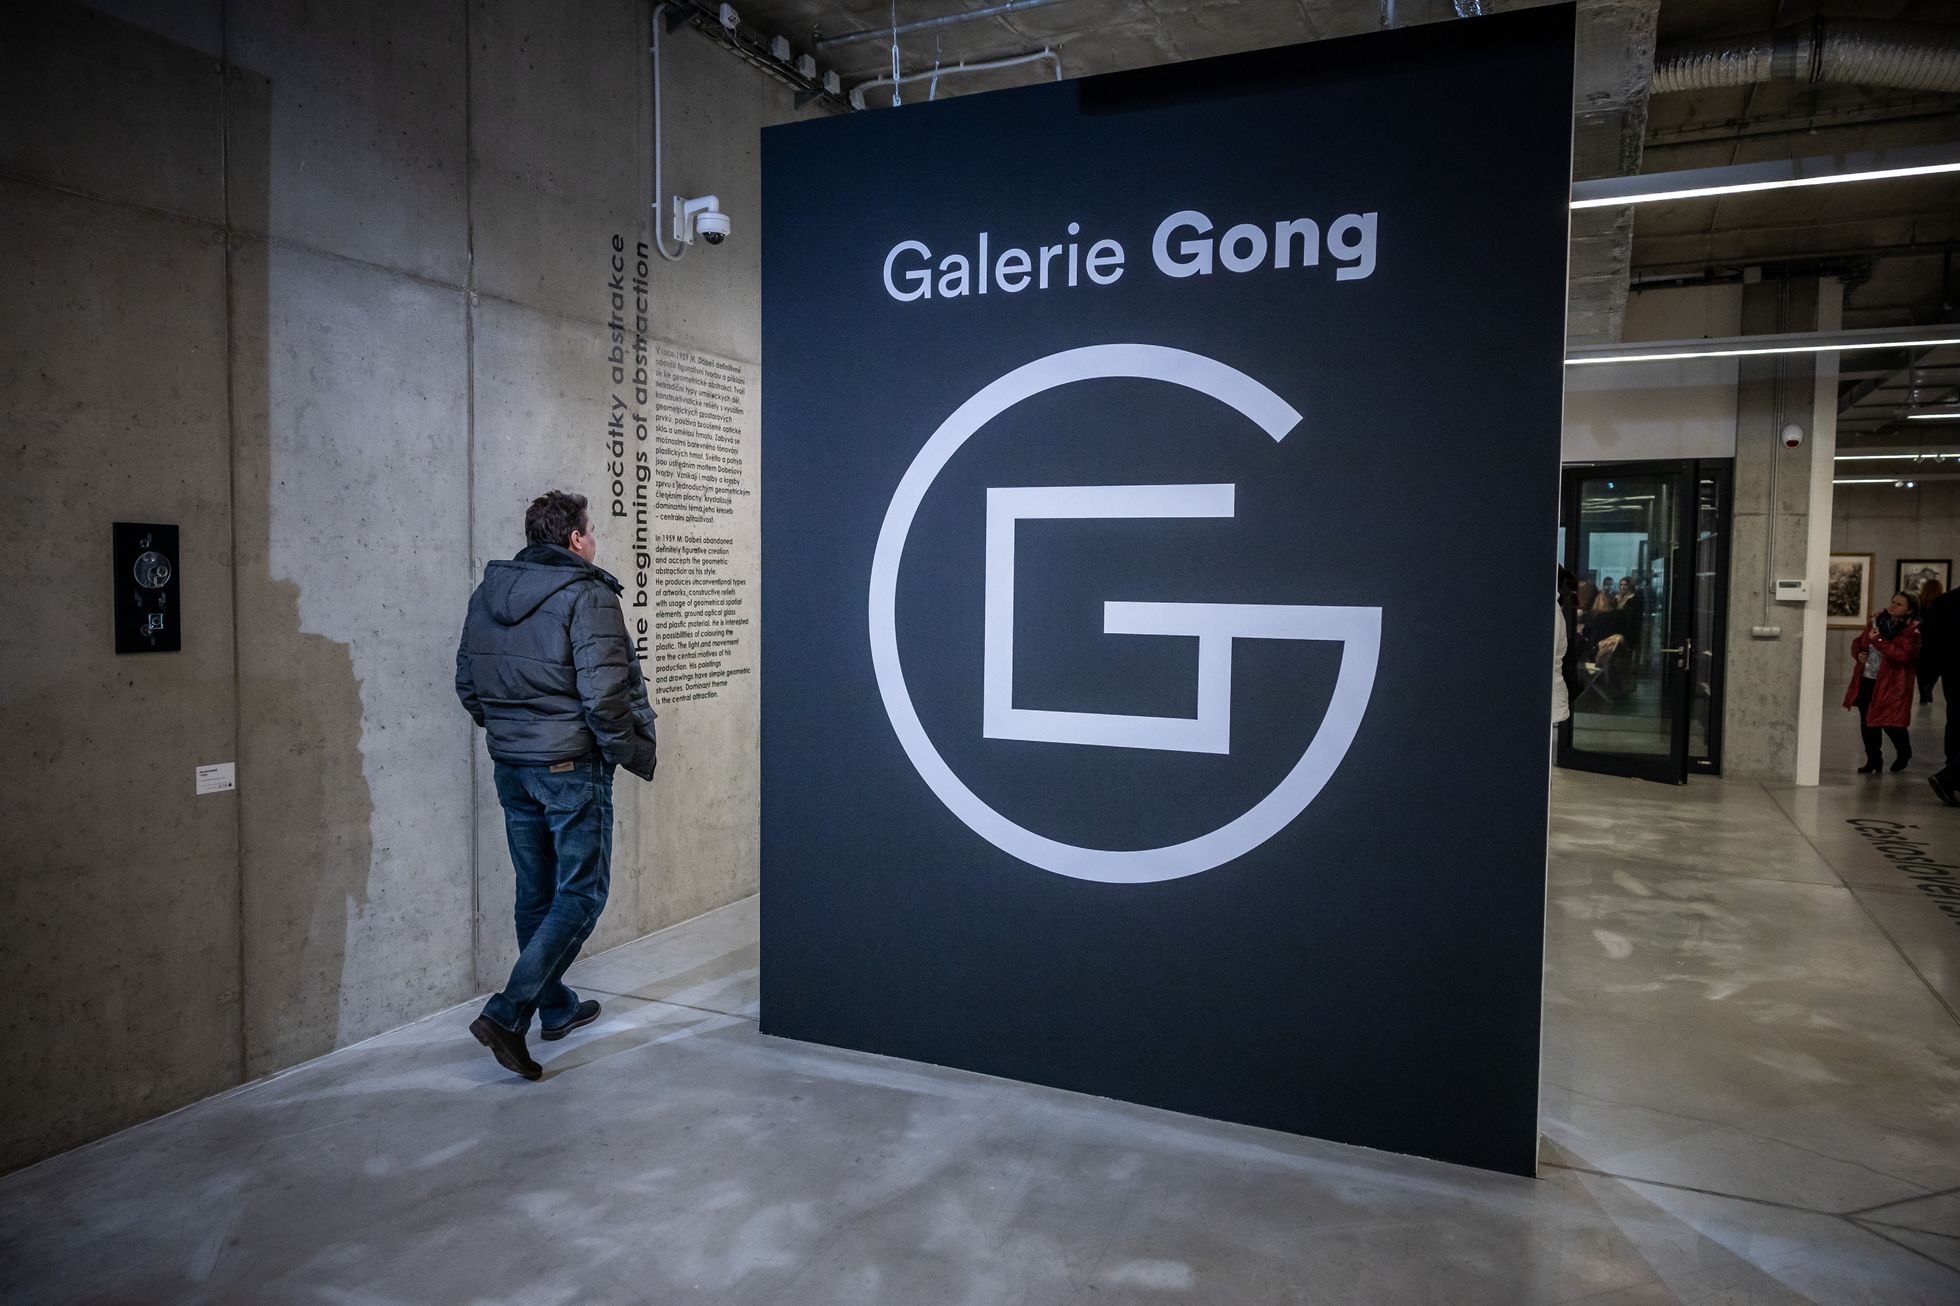 Galerie Gong